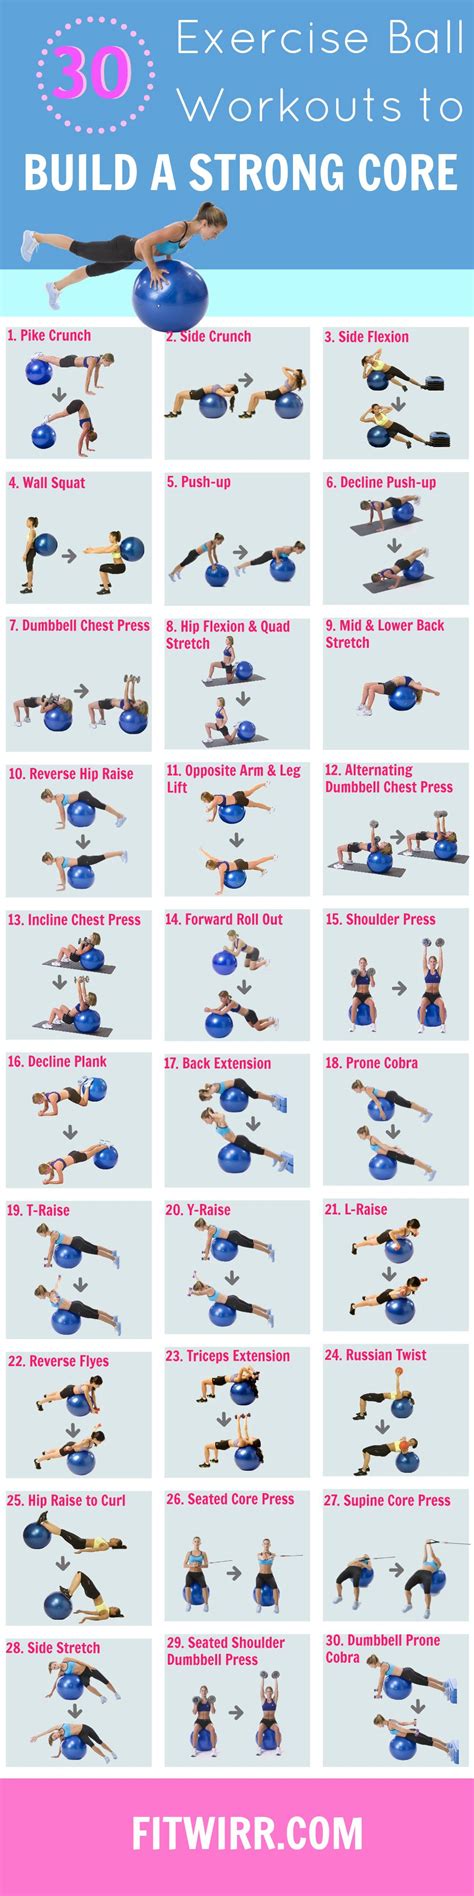 30 Exercise Ball Workout Idea You Can Do With A Fitness Ball Fitness